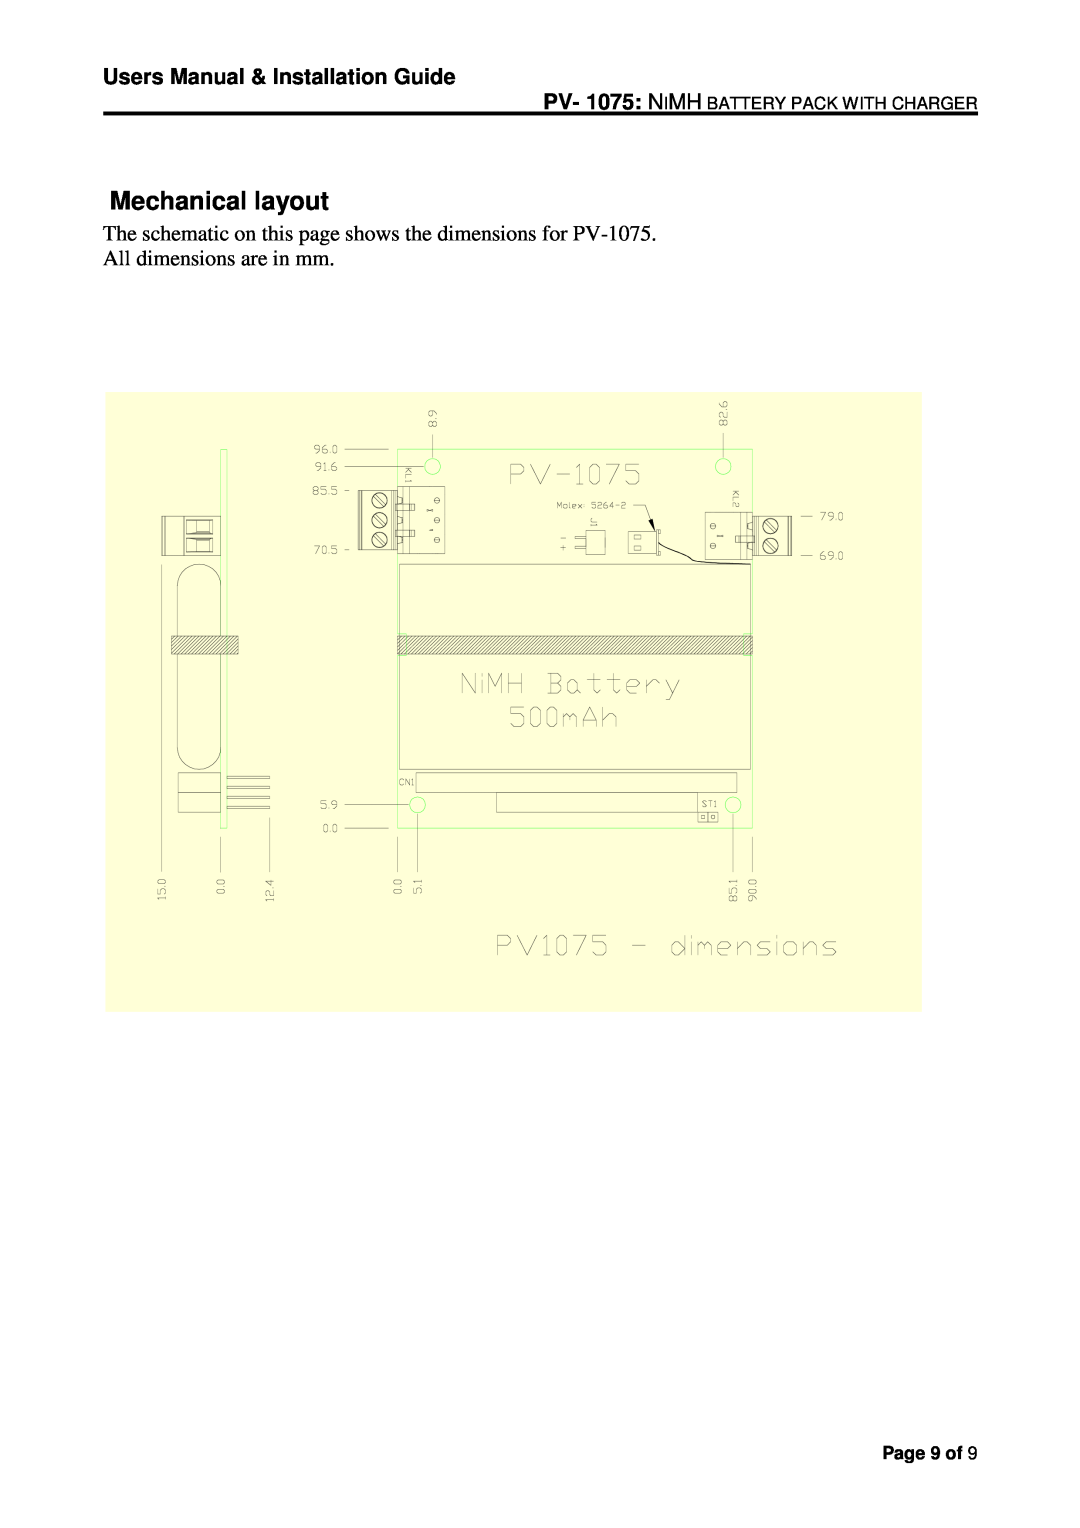 Micro Technic Mechanical layout, The schematic on this page shows the dimensions for PV-1075, All dimensions are in mm 